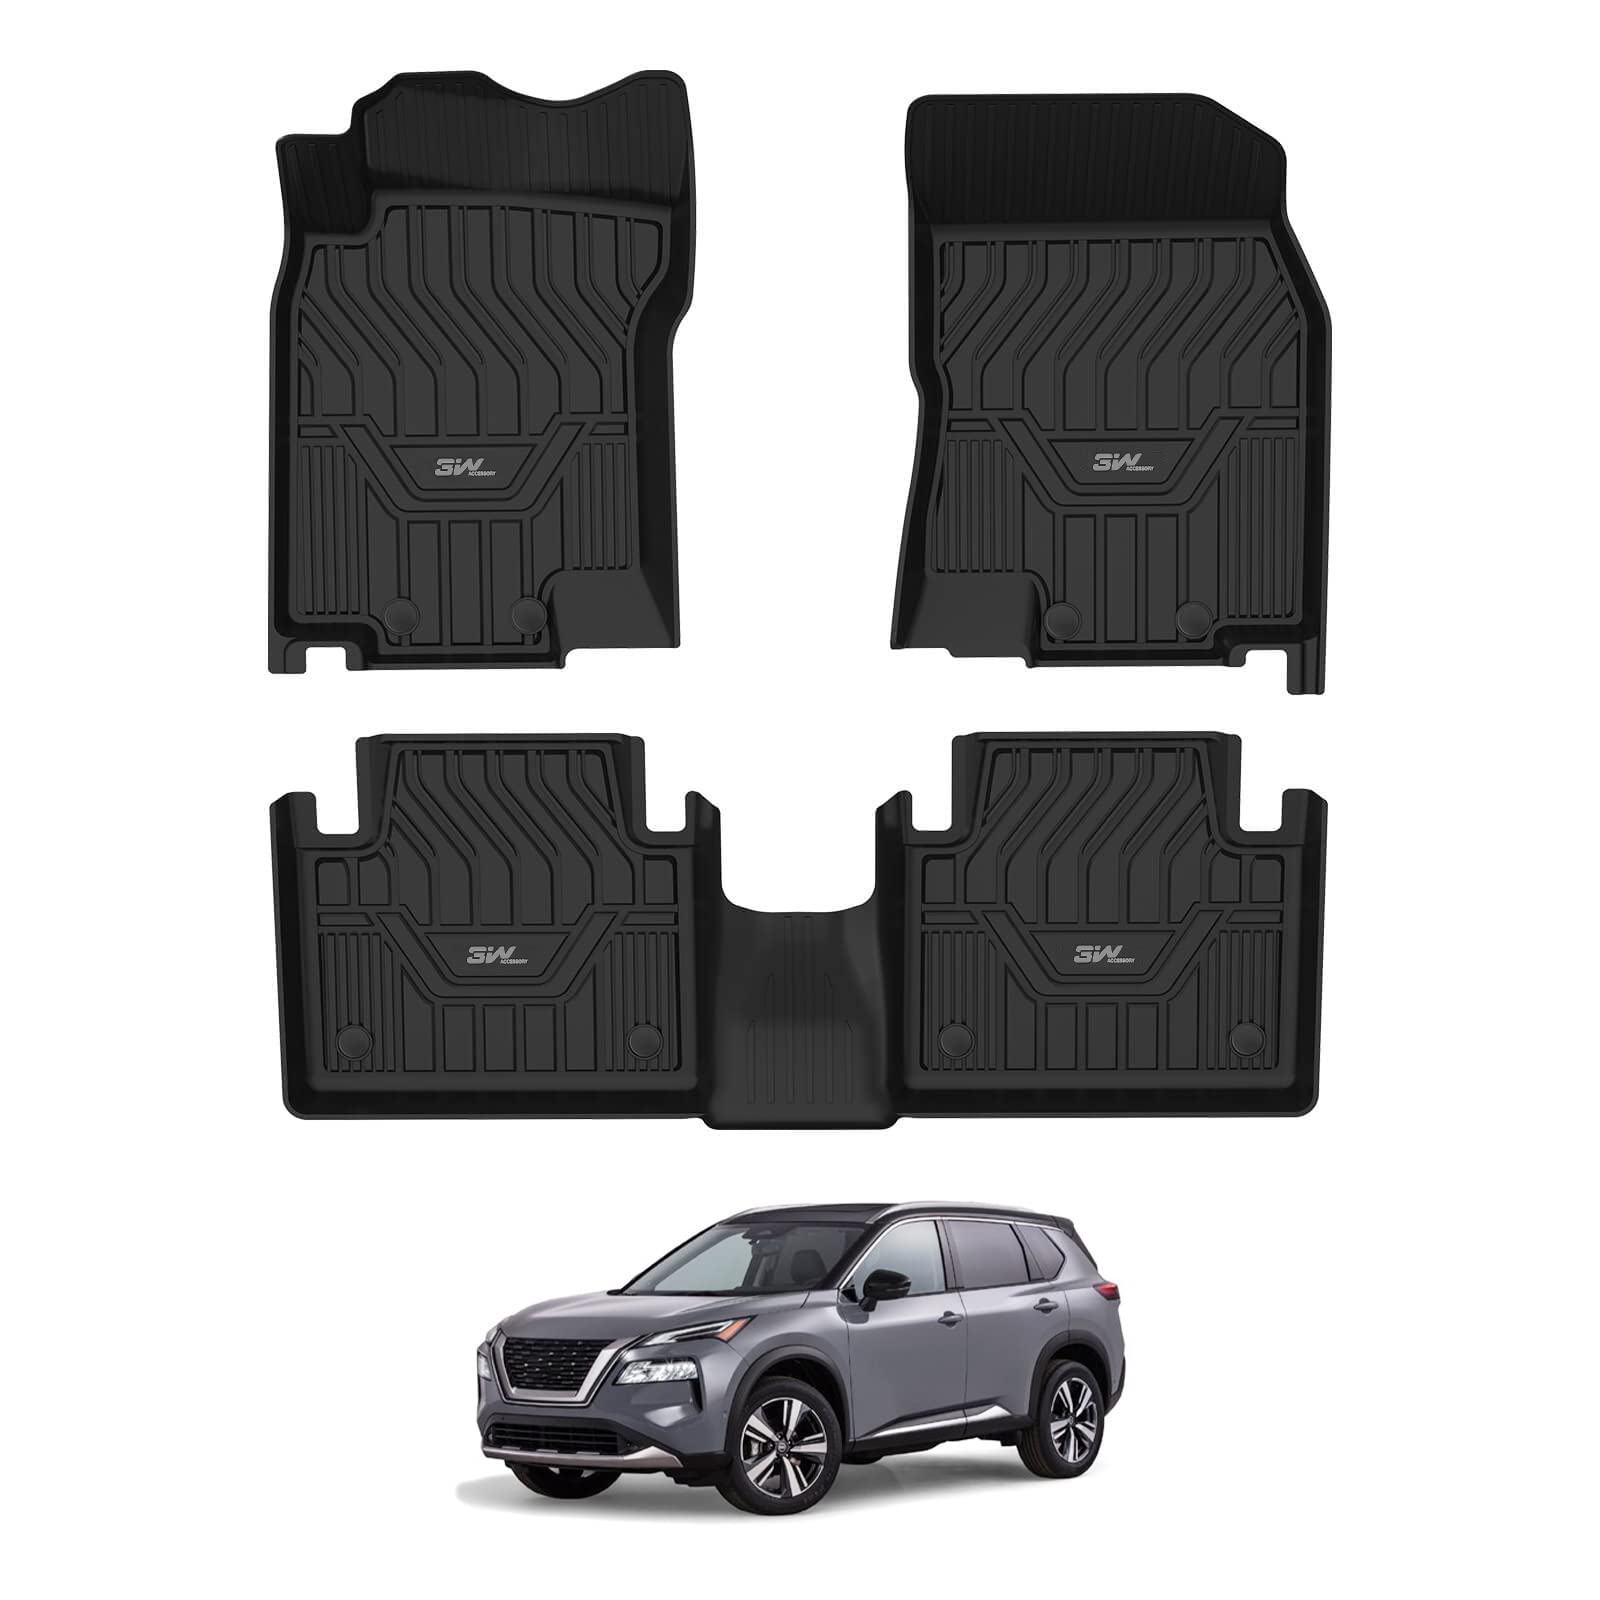 3W Nissan Rogue 2014-2020 Custom Floor Mats Cargo Liner TPE Material & All-Weather Protection Vehicles & Parts 3w 2014-2020 Rogue 2014-2020 1st&2nd Row Mats